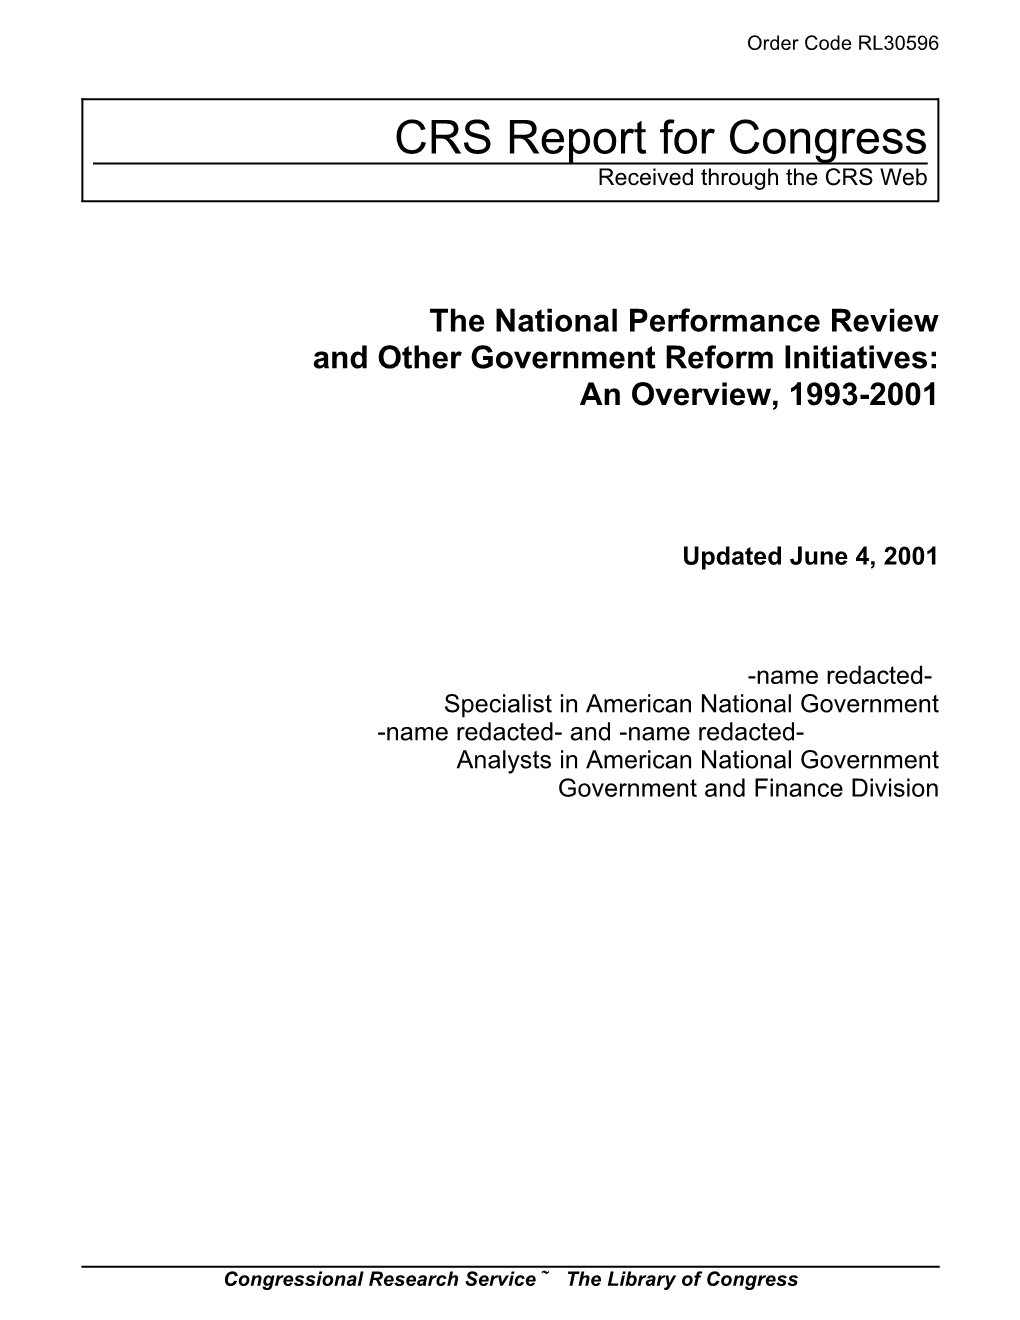 The National Performance Review and Other Government Reform Initiatives: an Overview, 1993-2001